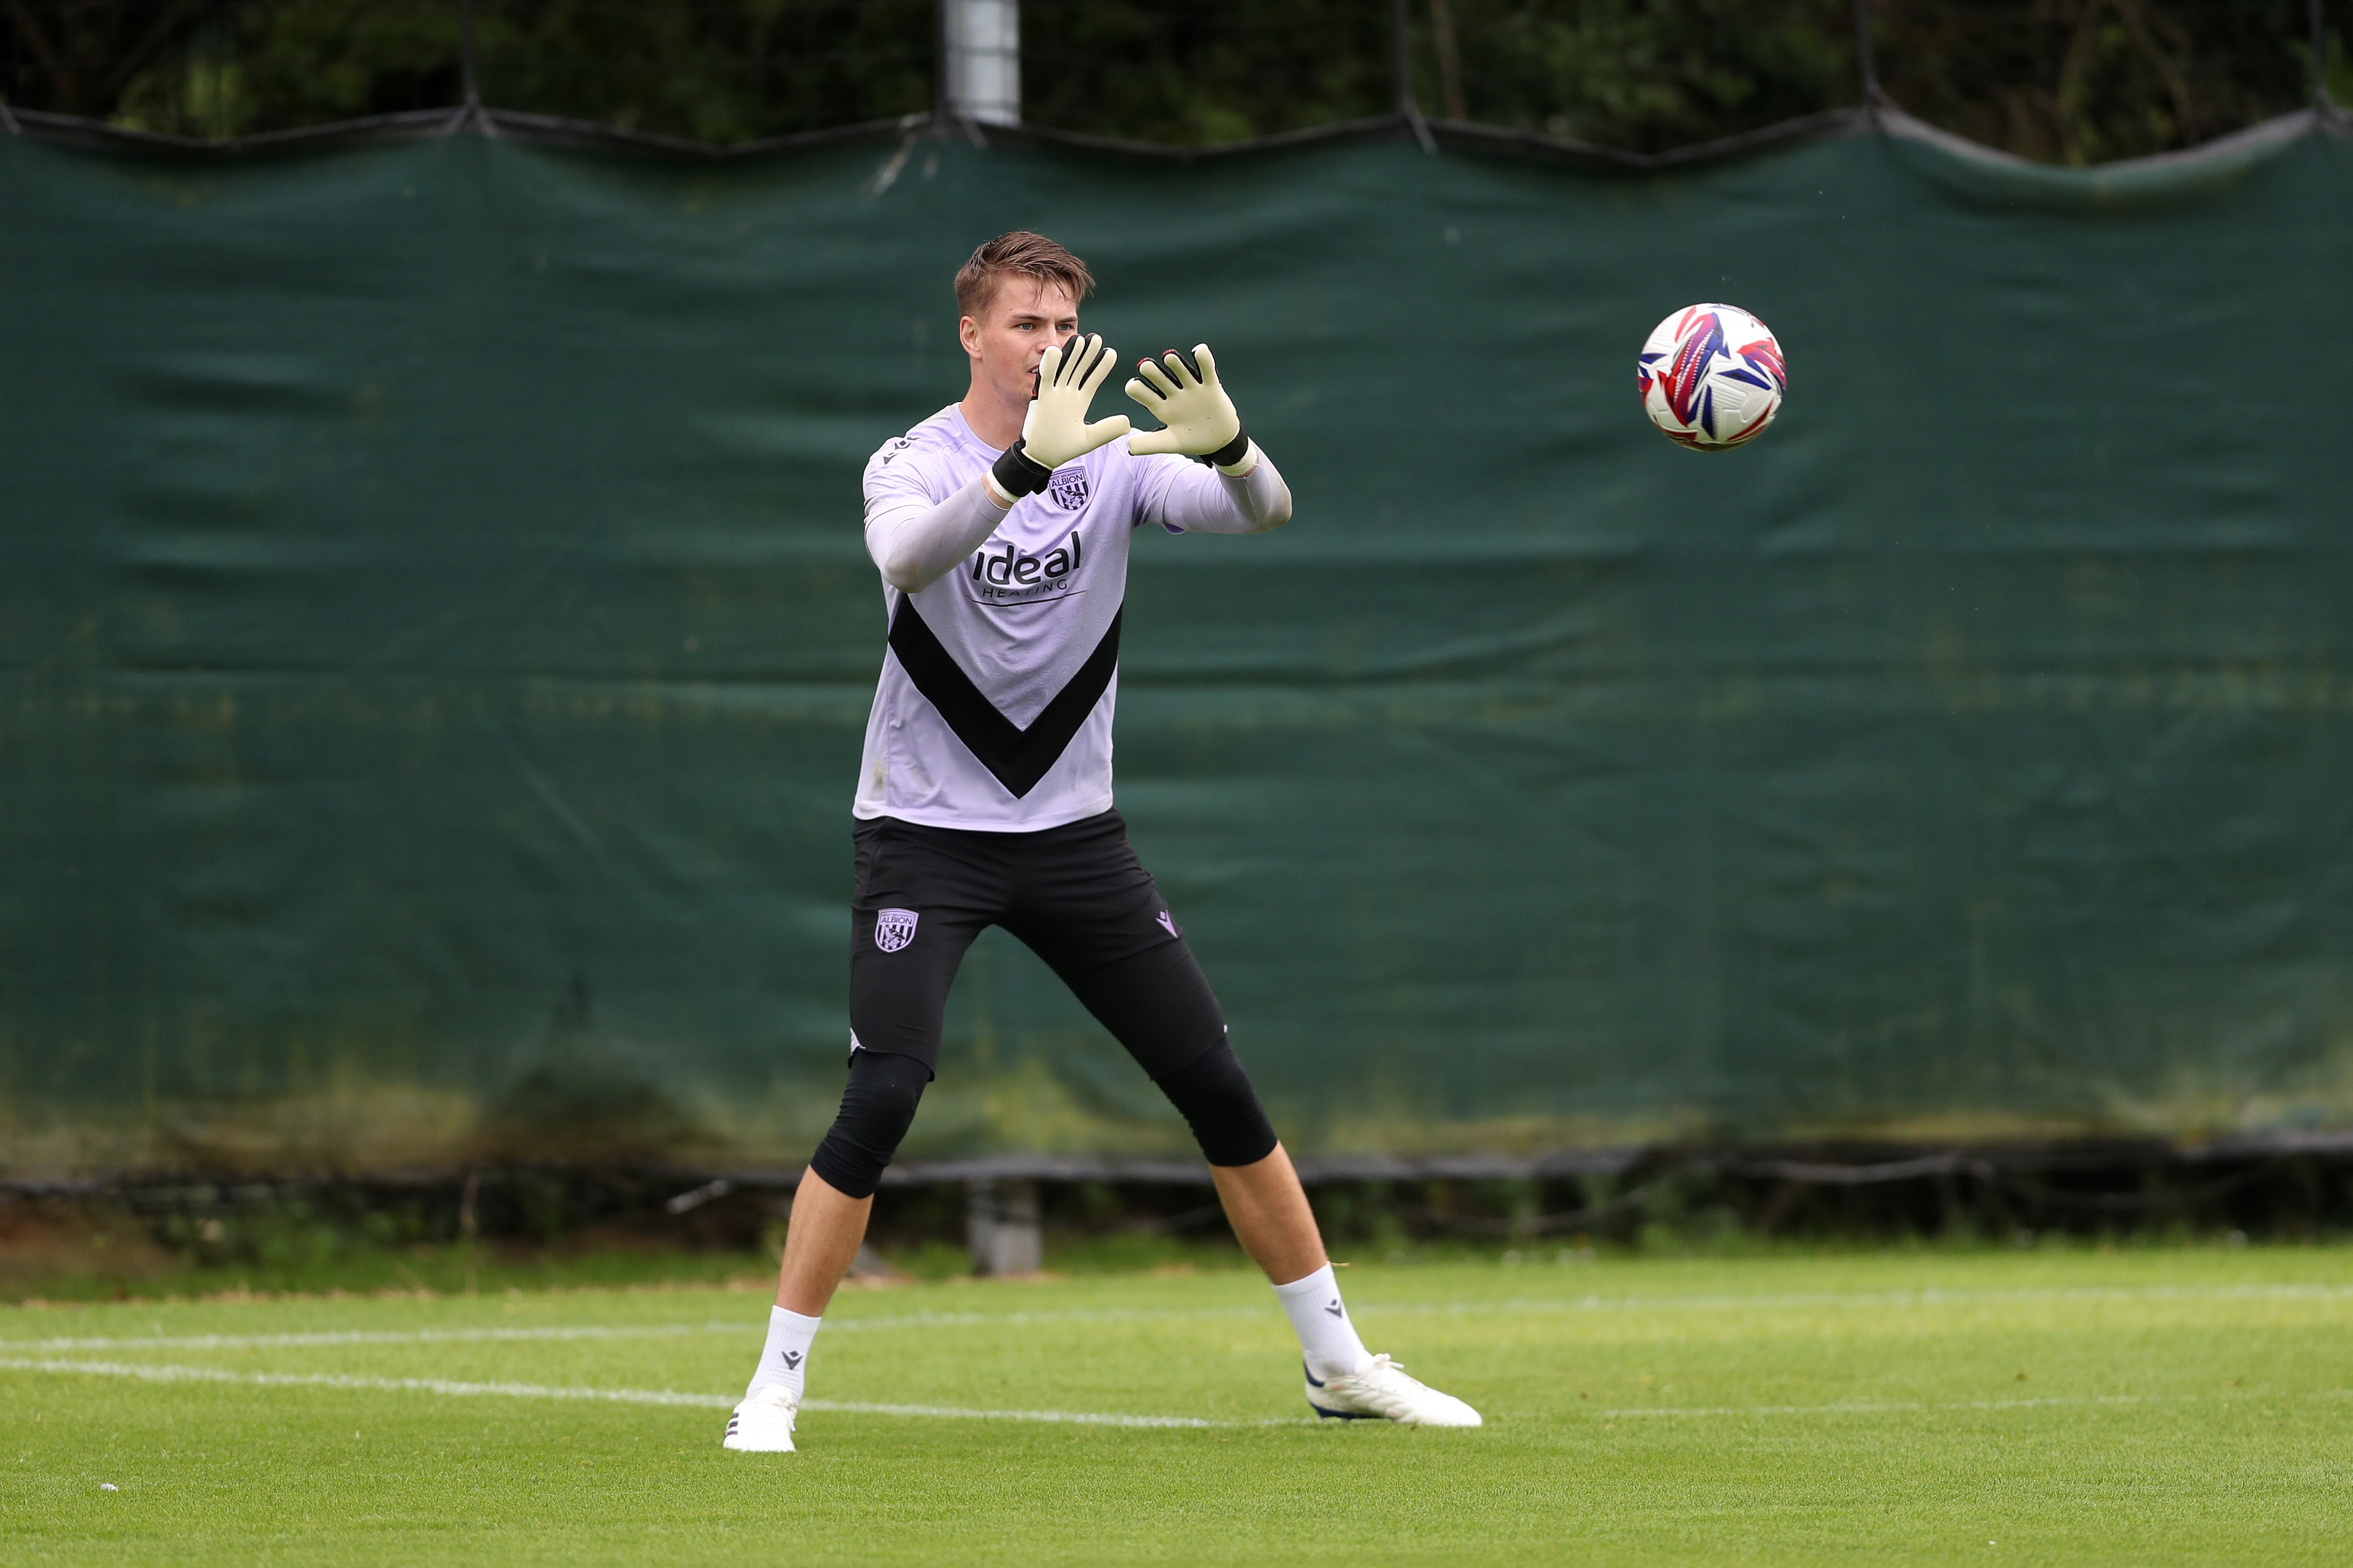 Josh Griffiths preparing to catch the football during a training session 